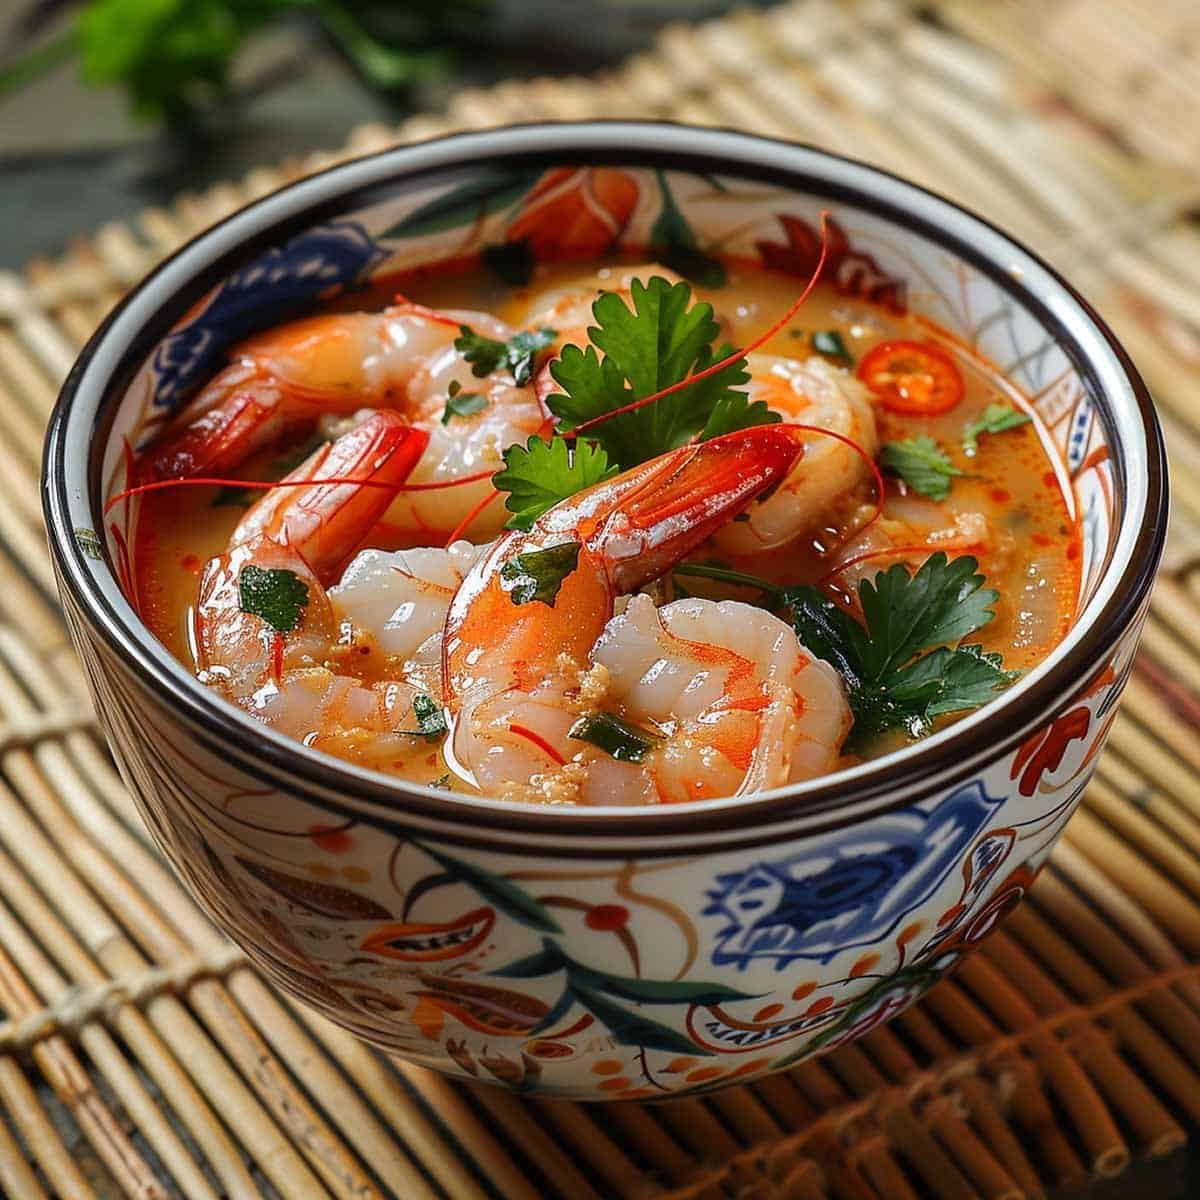 bowl of Tom Yum Goong Thai hot and sour shrimp soup with shrimp, mushrooms, tomatoes, and herbs in a spicy broth